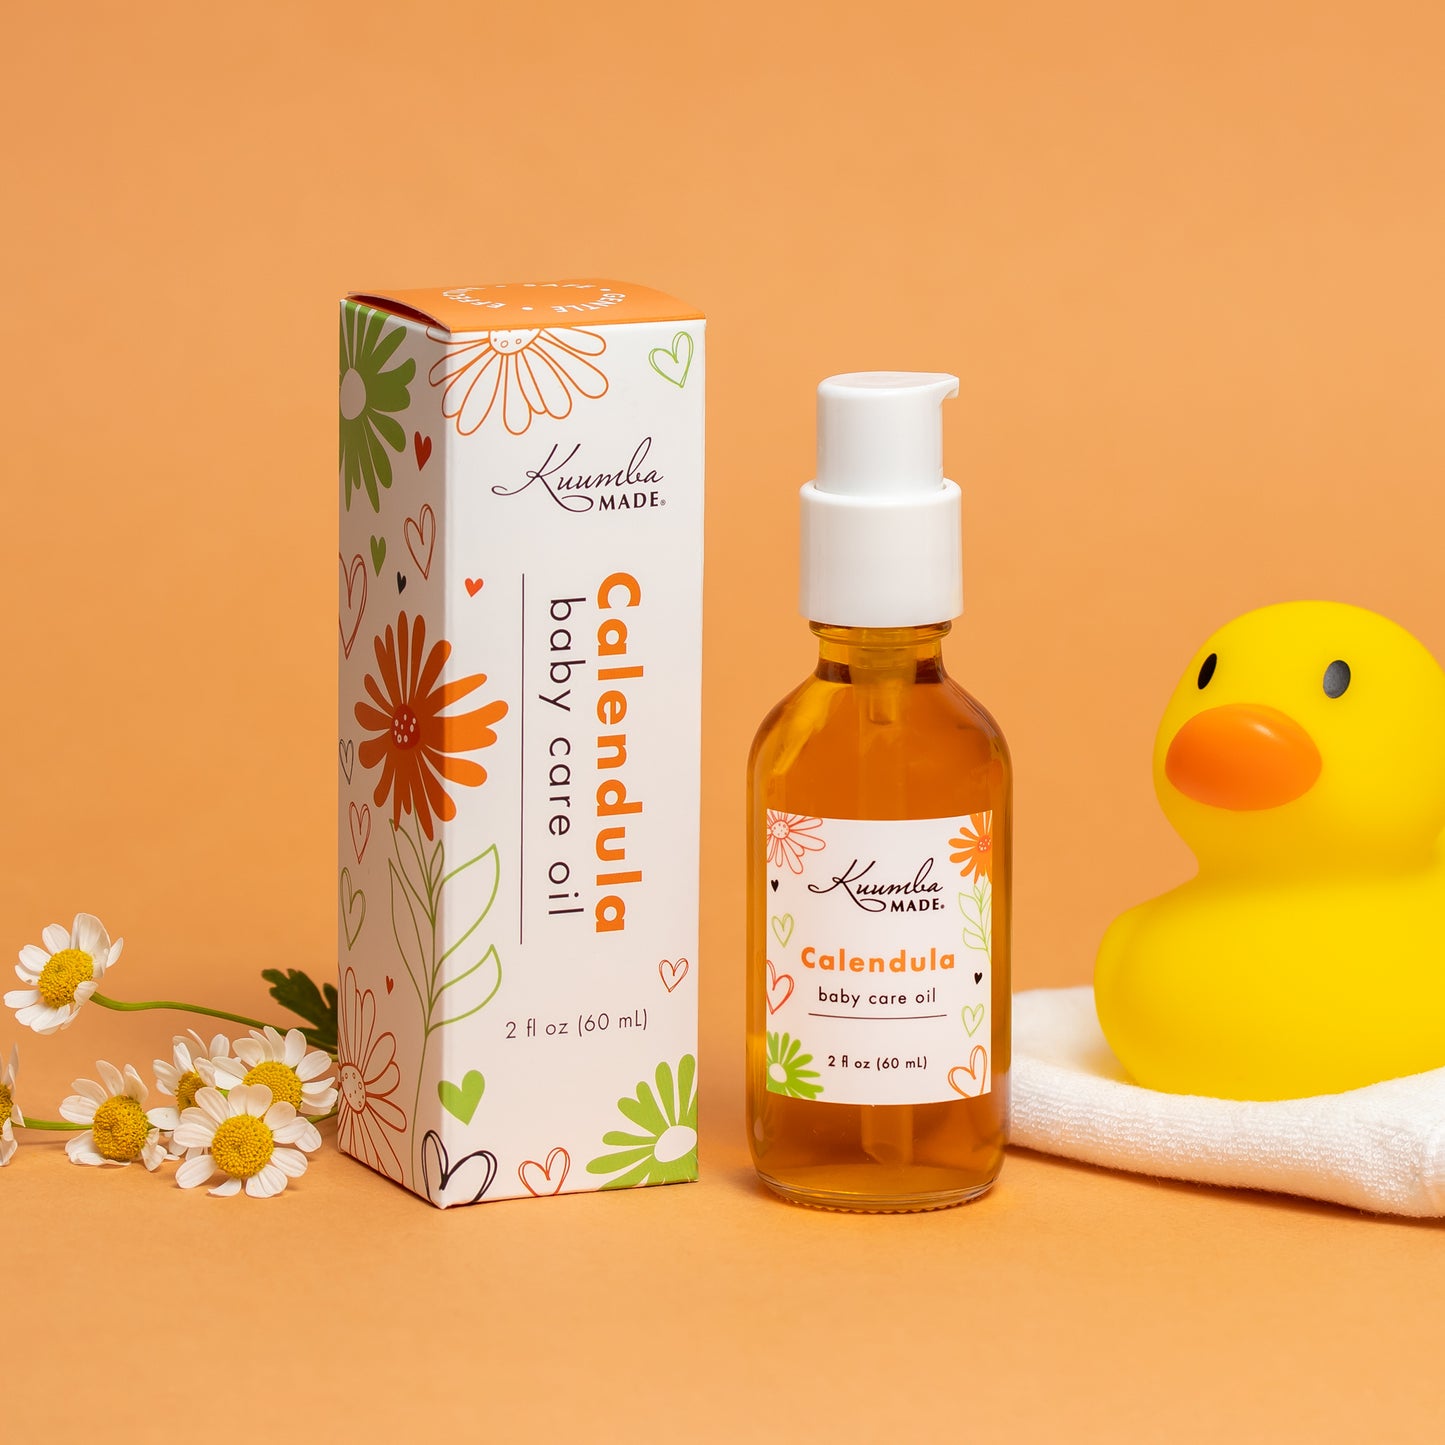 Kuumba Made Baby Care Oil with rubber duckie and little chamomile flowers